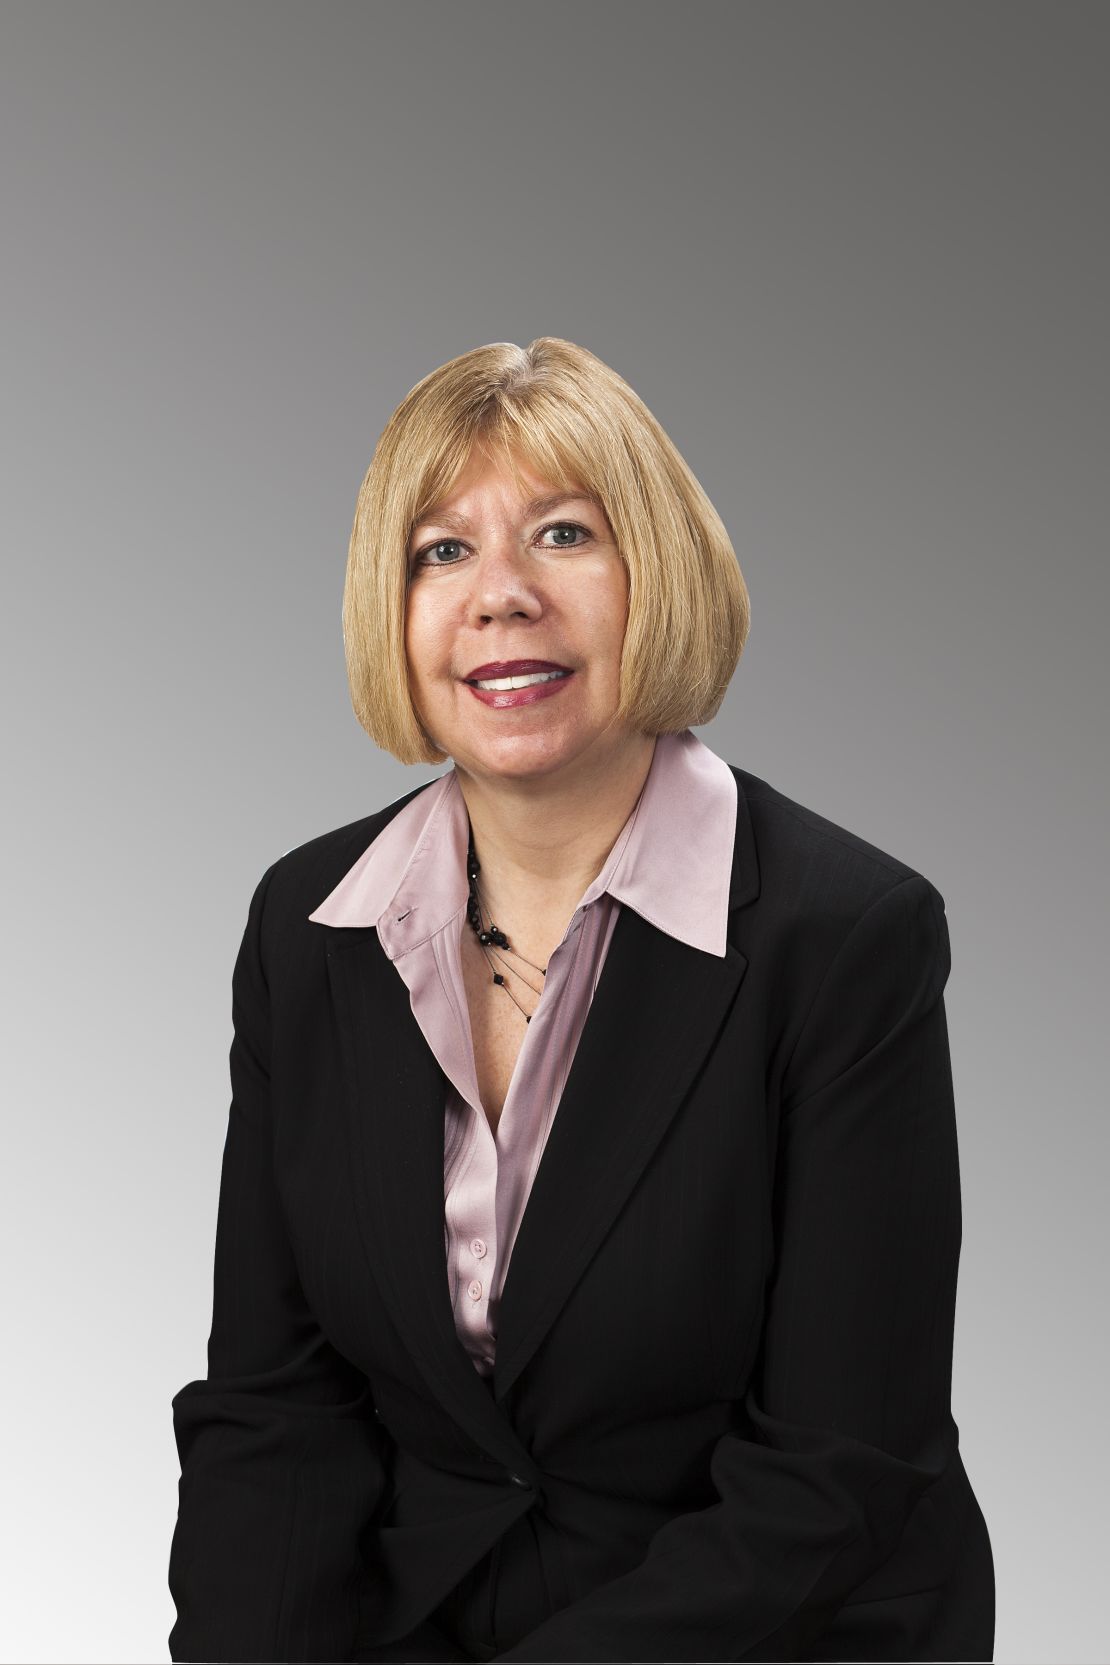 Karen Horting, CEO and Executive Director at the Society of Women Engineers